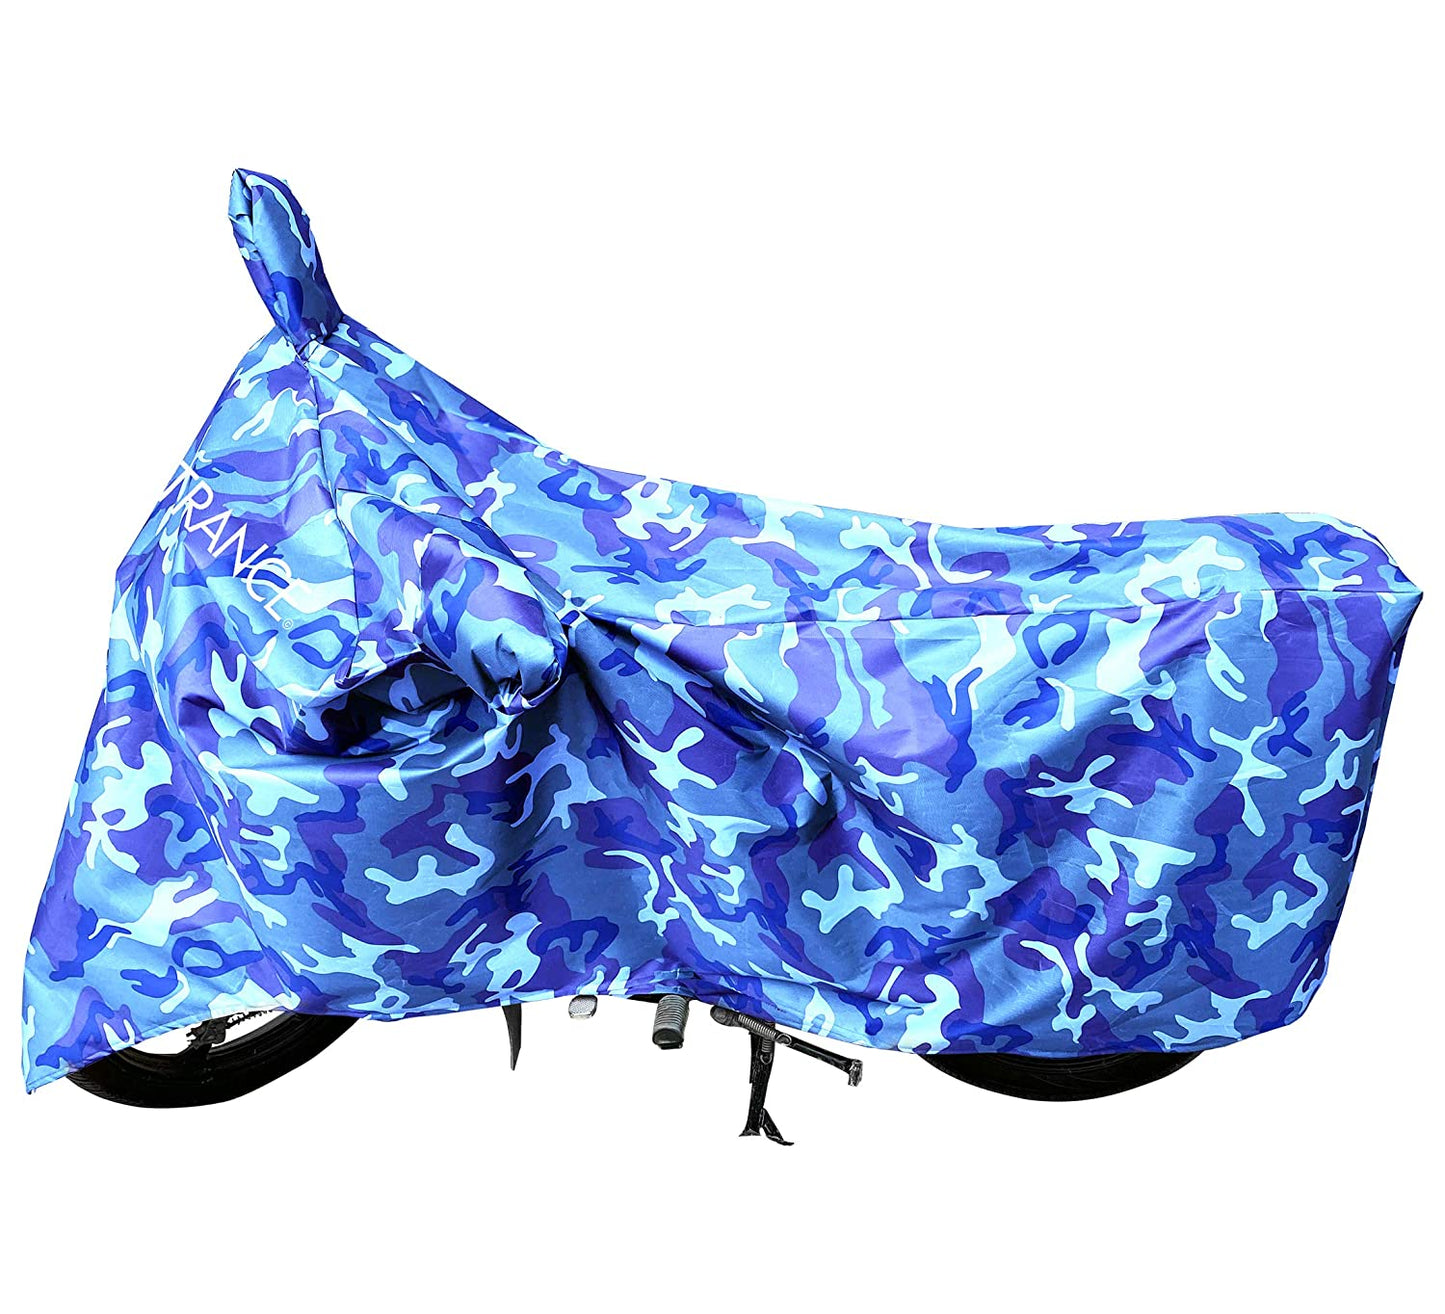 MotoTrance Jungle Bike Body Covers For OkinawaÂ  Ridge Plus 2018 - Interlock-Stitched Waterproof and Heat Resistant with Mirror Pockets